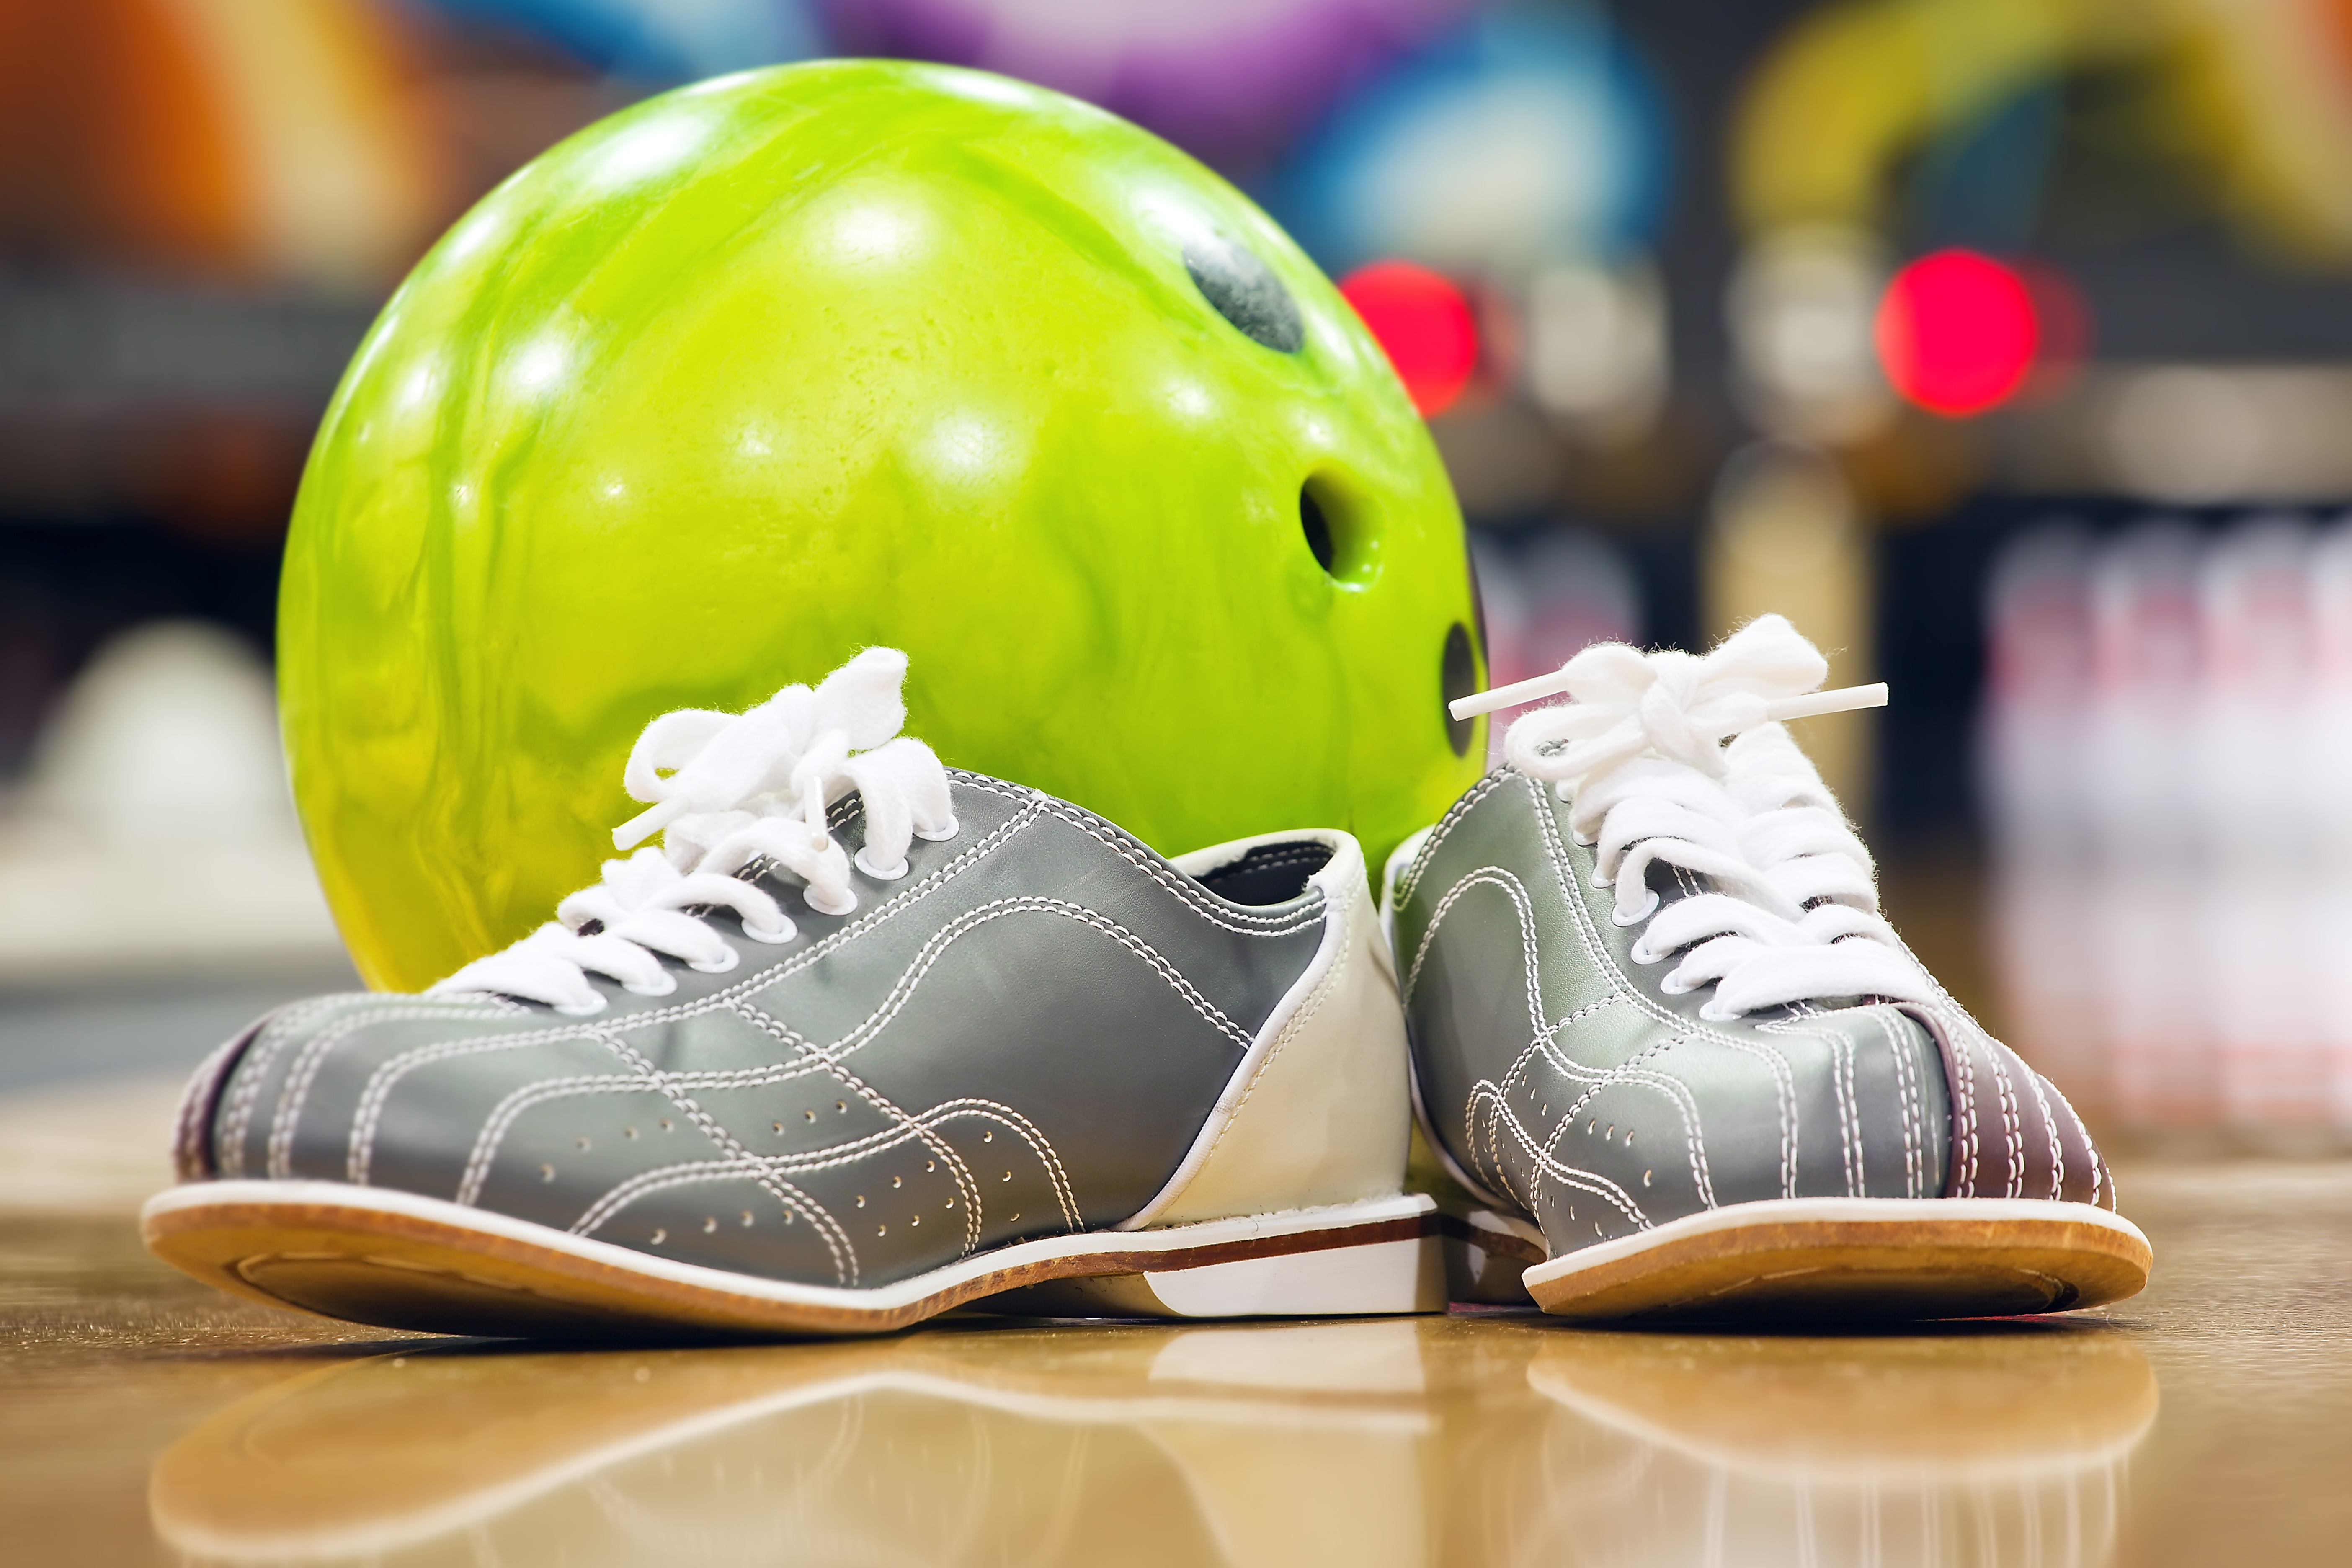 You Won’t Believe These Amazing Bowling Tricks